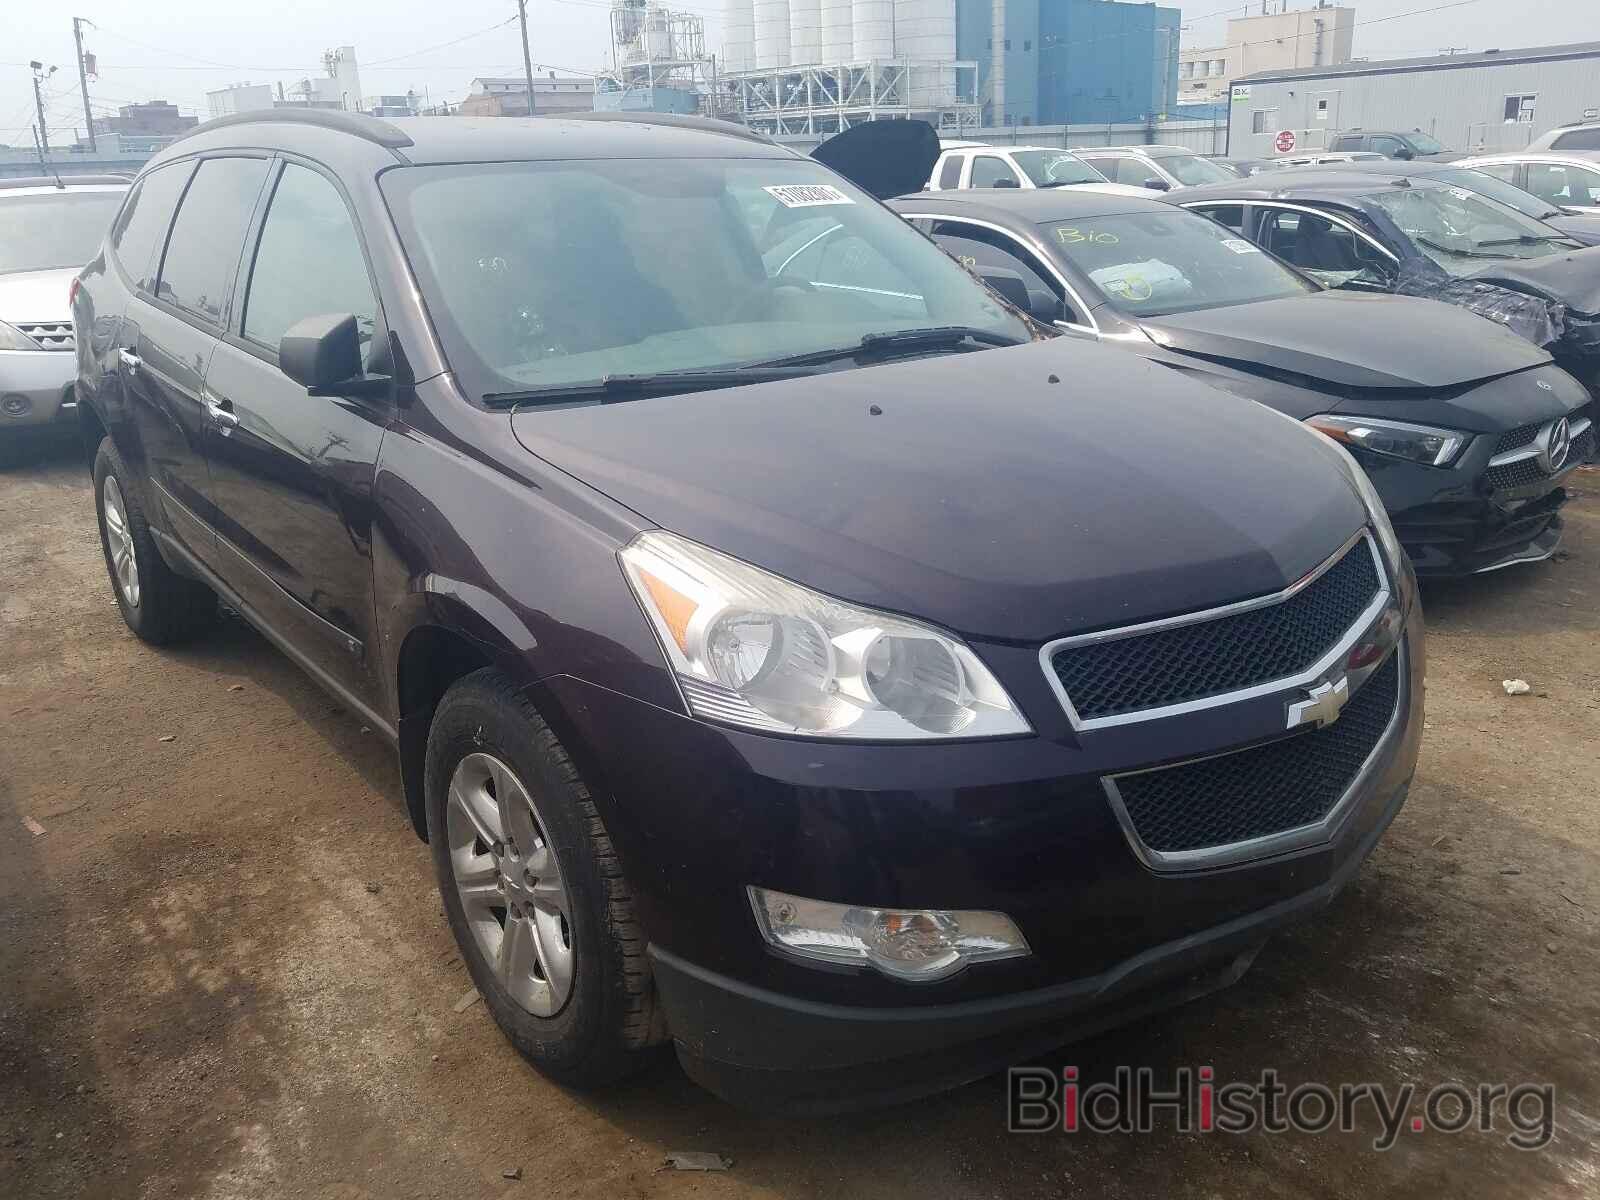 Photo 1GNLREED1AS131785 - CHEVROLET TRAVERSE 2010